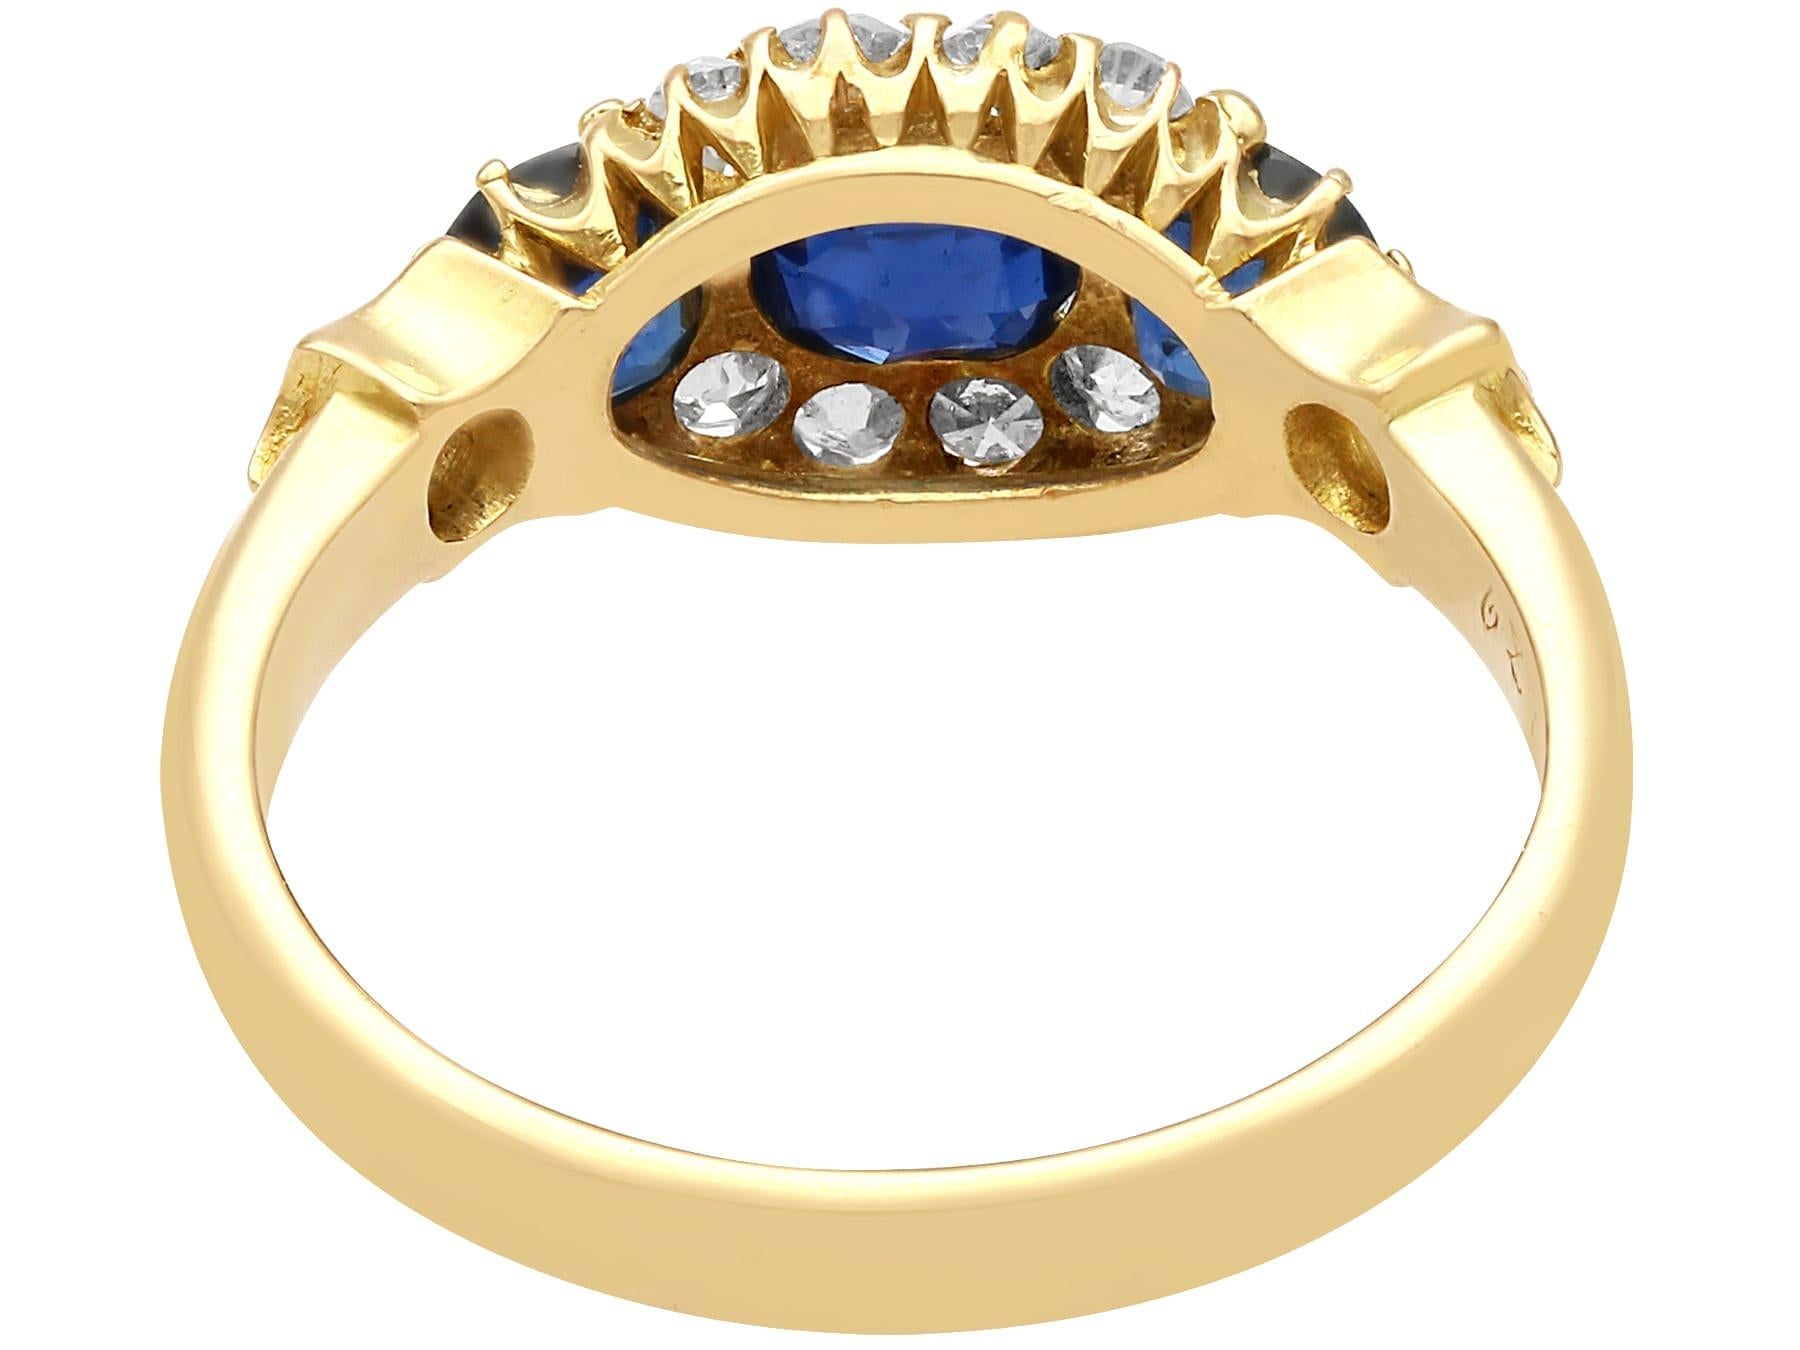 Antique 1.50 Carat Sapphire and Diamond Yellow Gold Cocktail Ring In Excellent Condition For Sale In Jesmond, Newcastle Upon Tyne